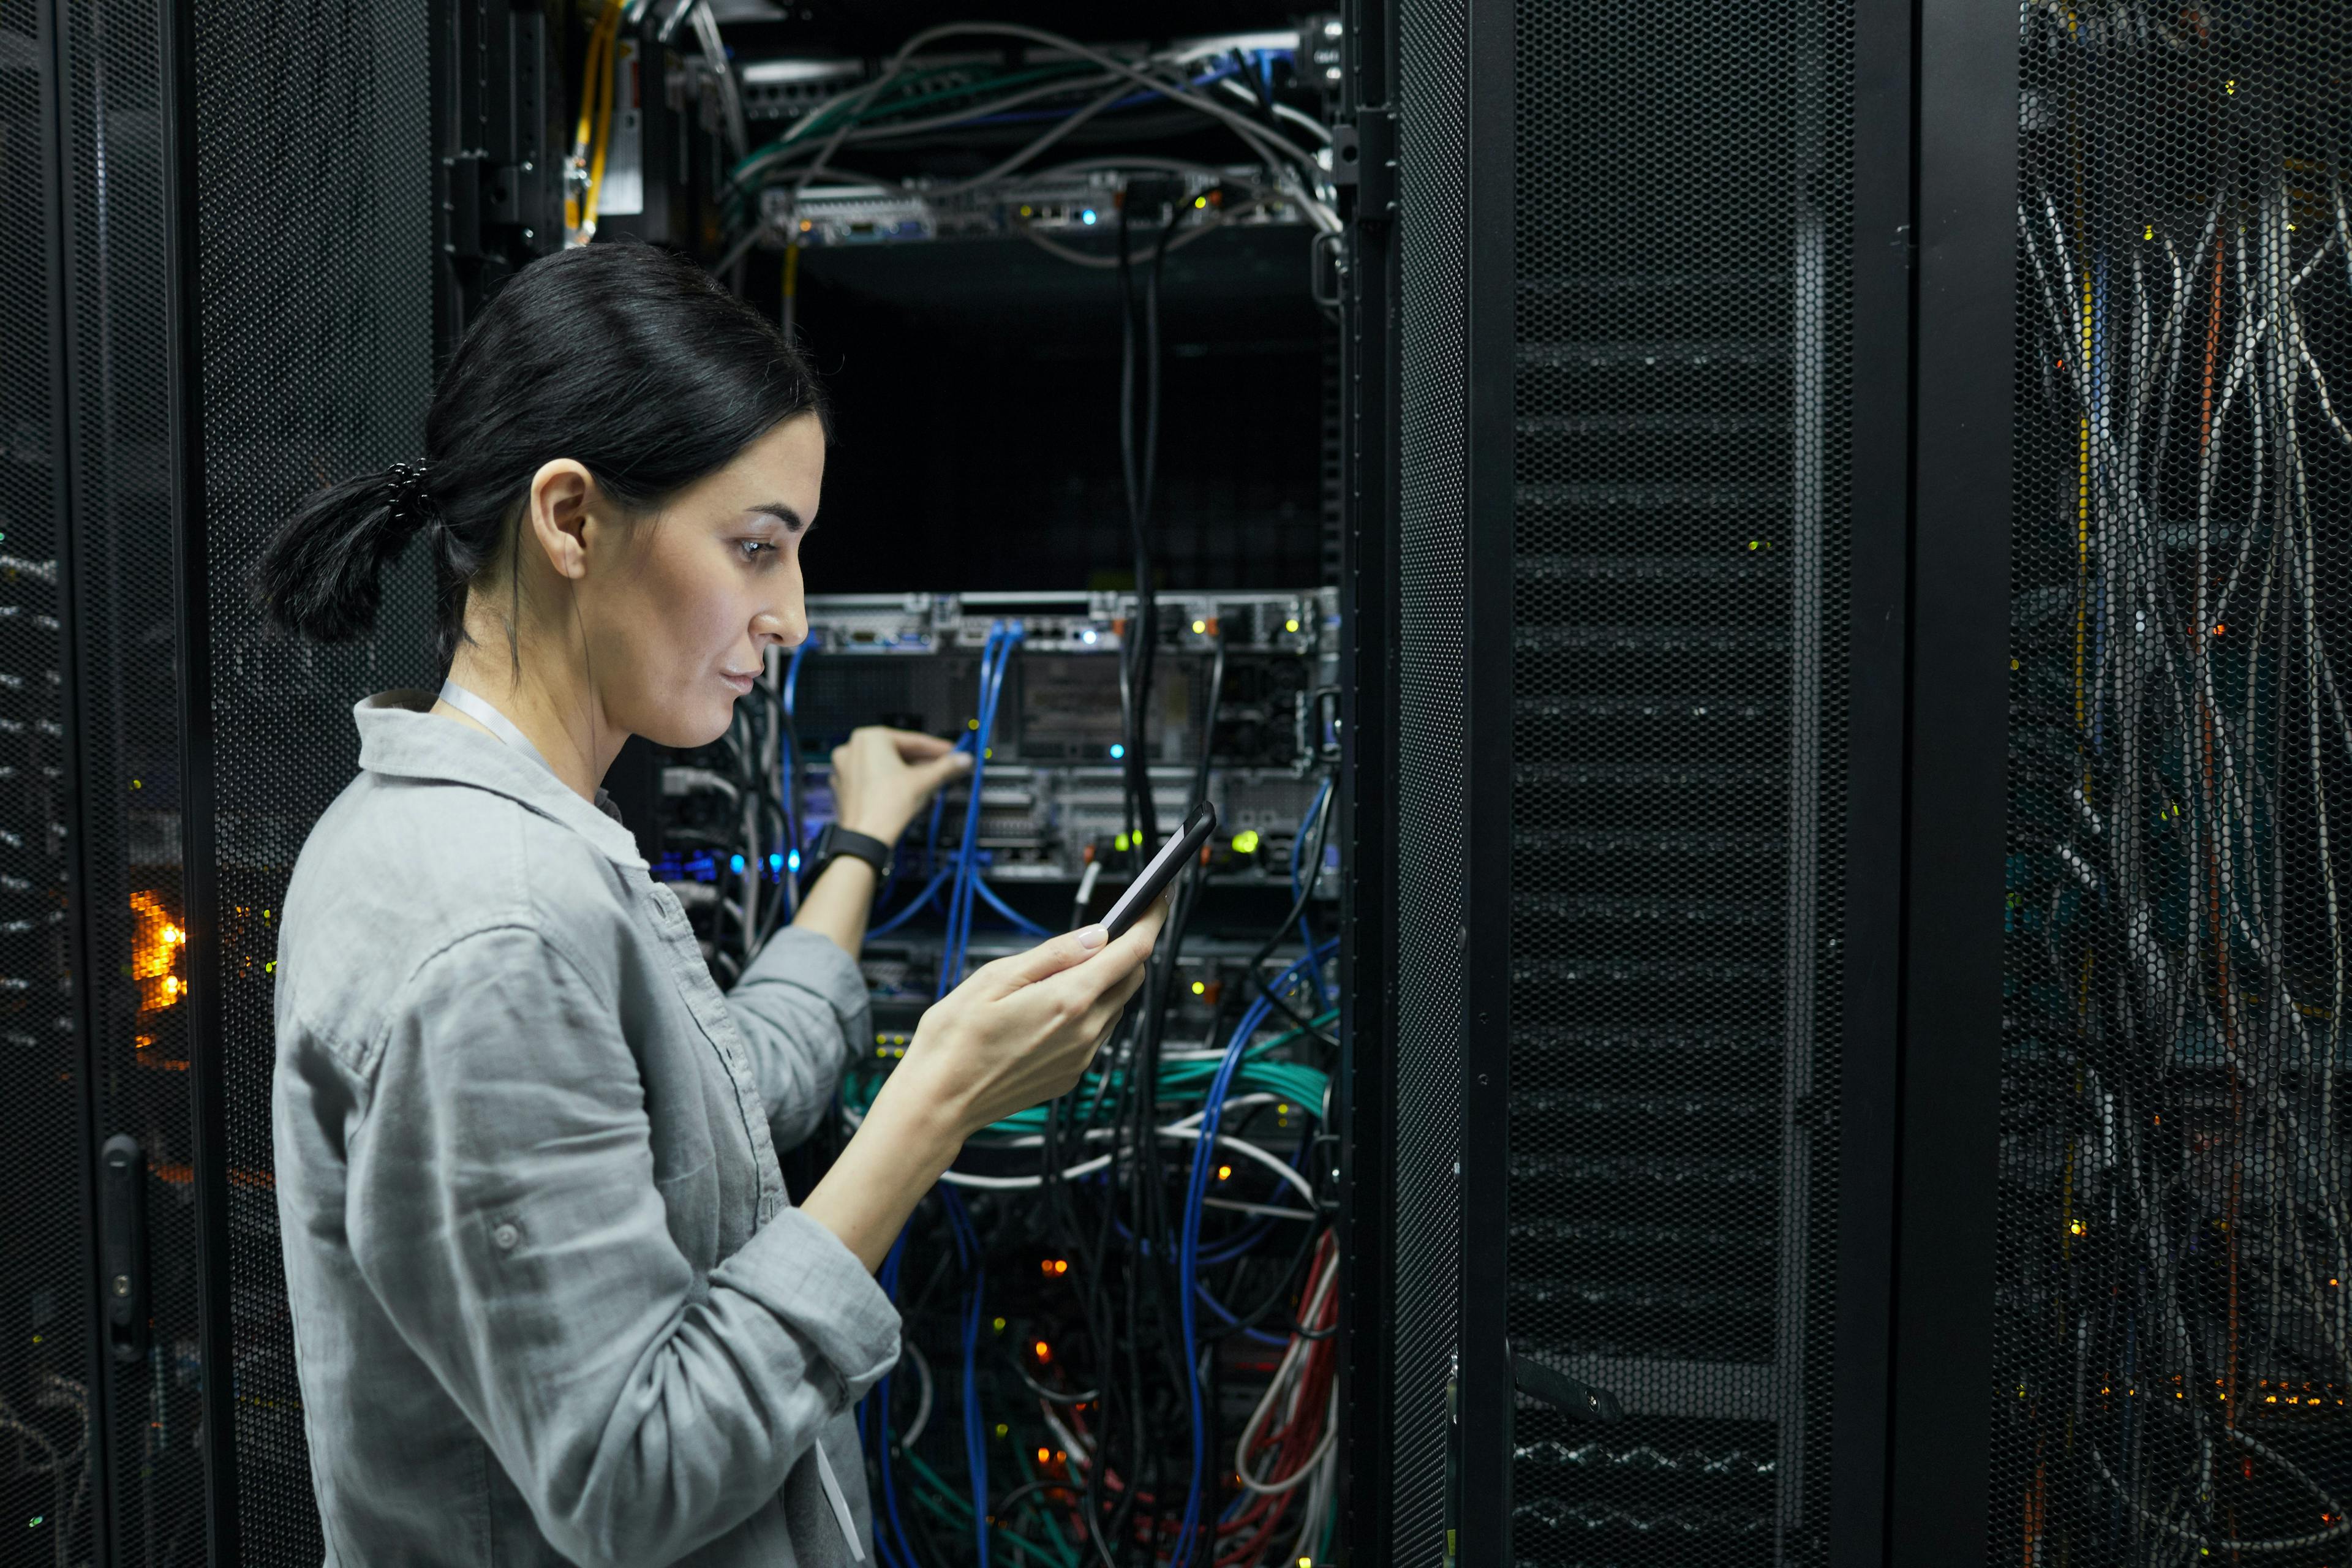 Worker standing in front of a rack of servers to test a connection